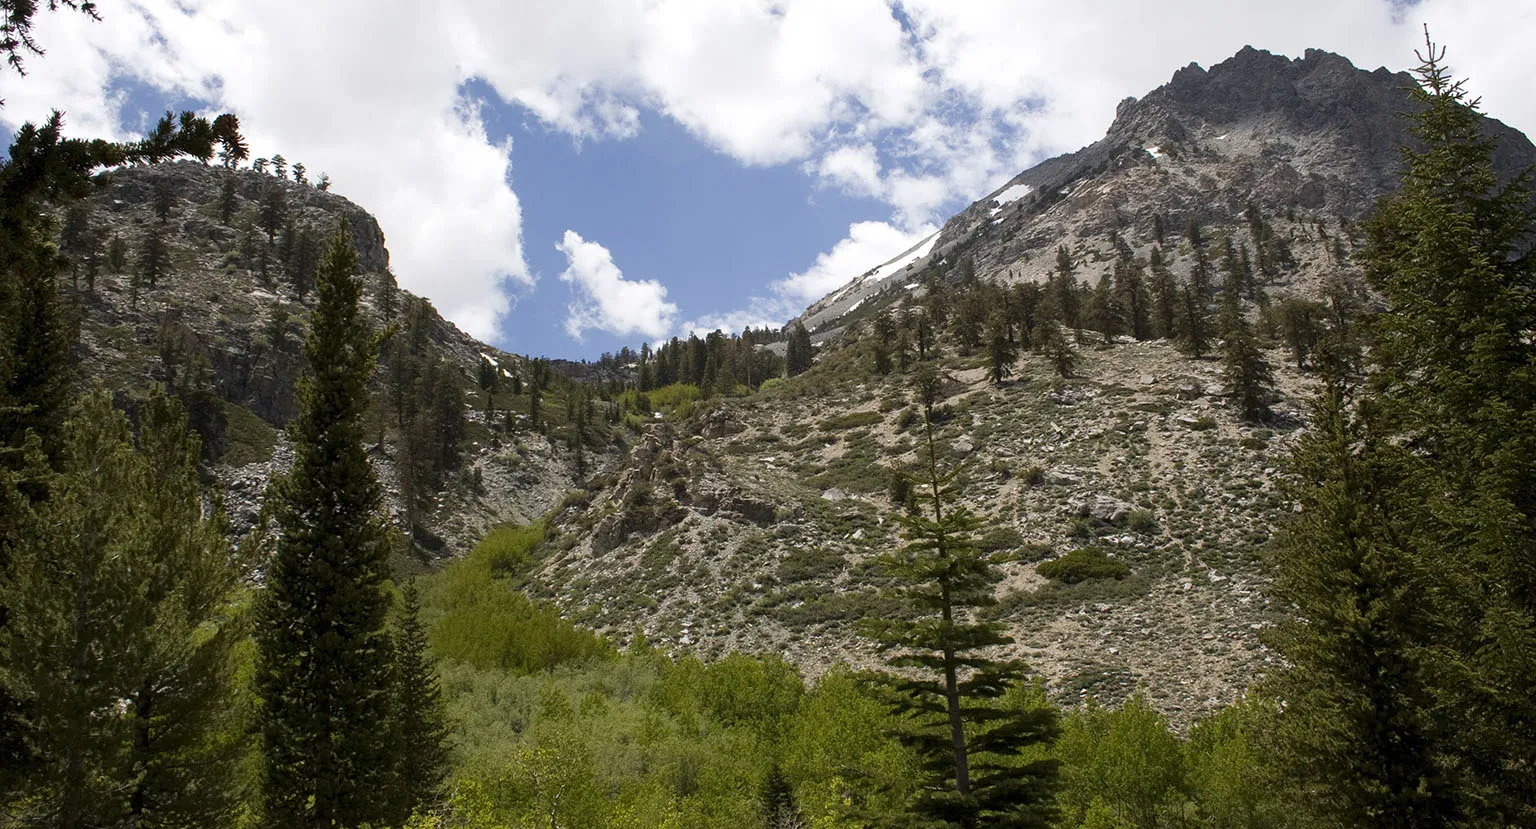 The western view - towards Kearsarge Pass - from Onion Valley Campground